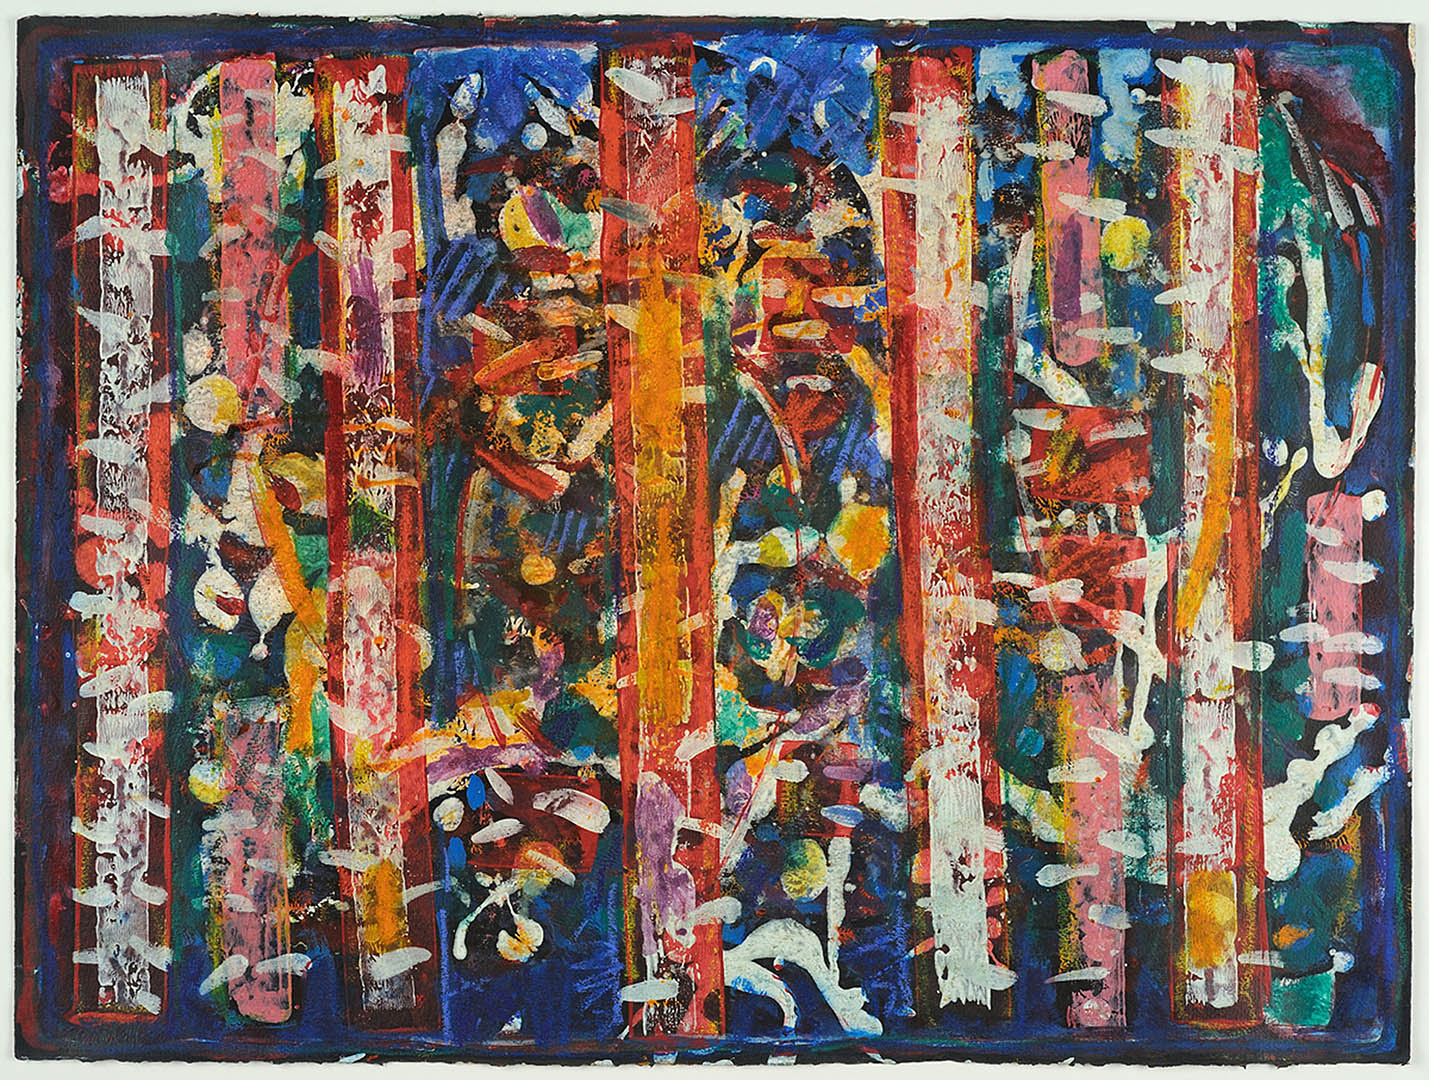 "Five Blue Notes" (1980), an image in encaustic and egg tempera on board by David C. Driskell, is among images on display in the Museum of Art exhibition "Convergence."